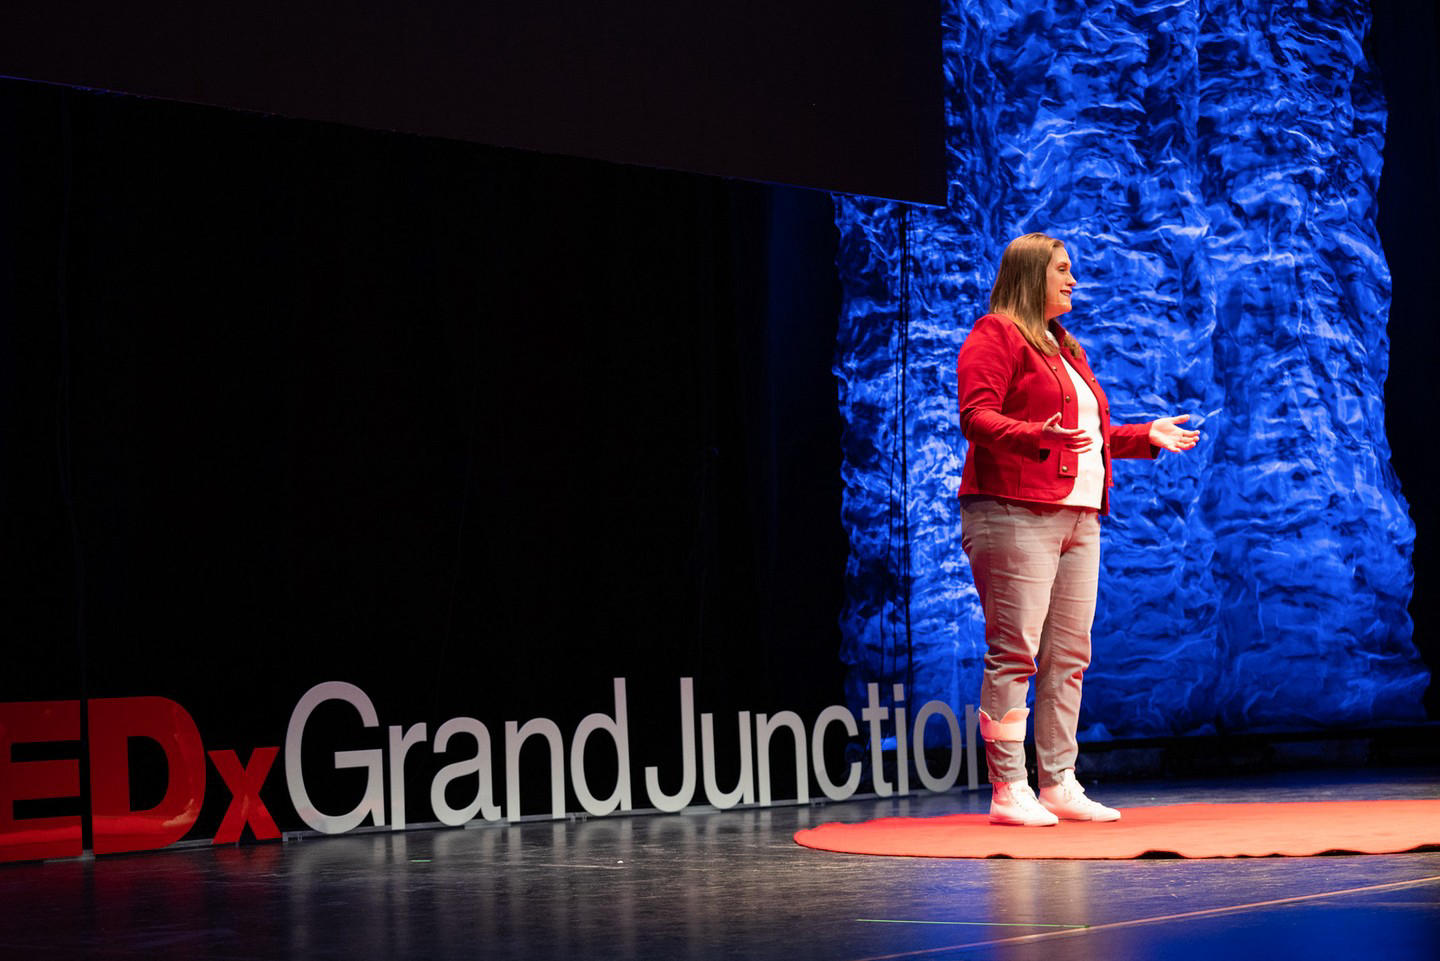 TEDx - TEDxGrandJunction returned to a historic local theater for their 2022 event